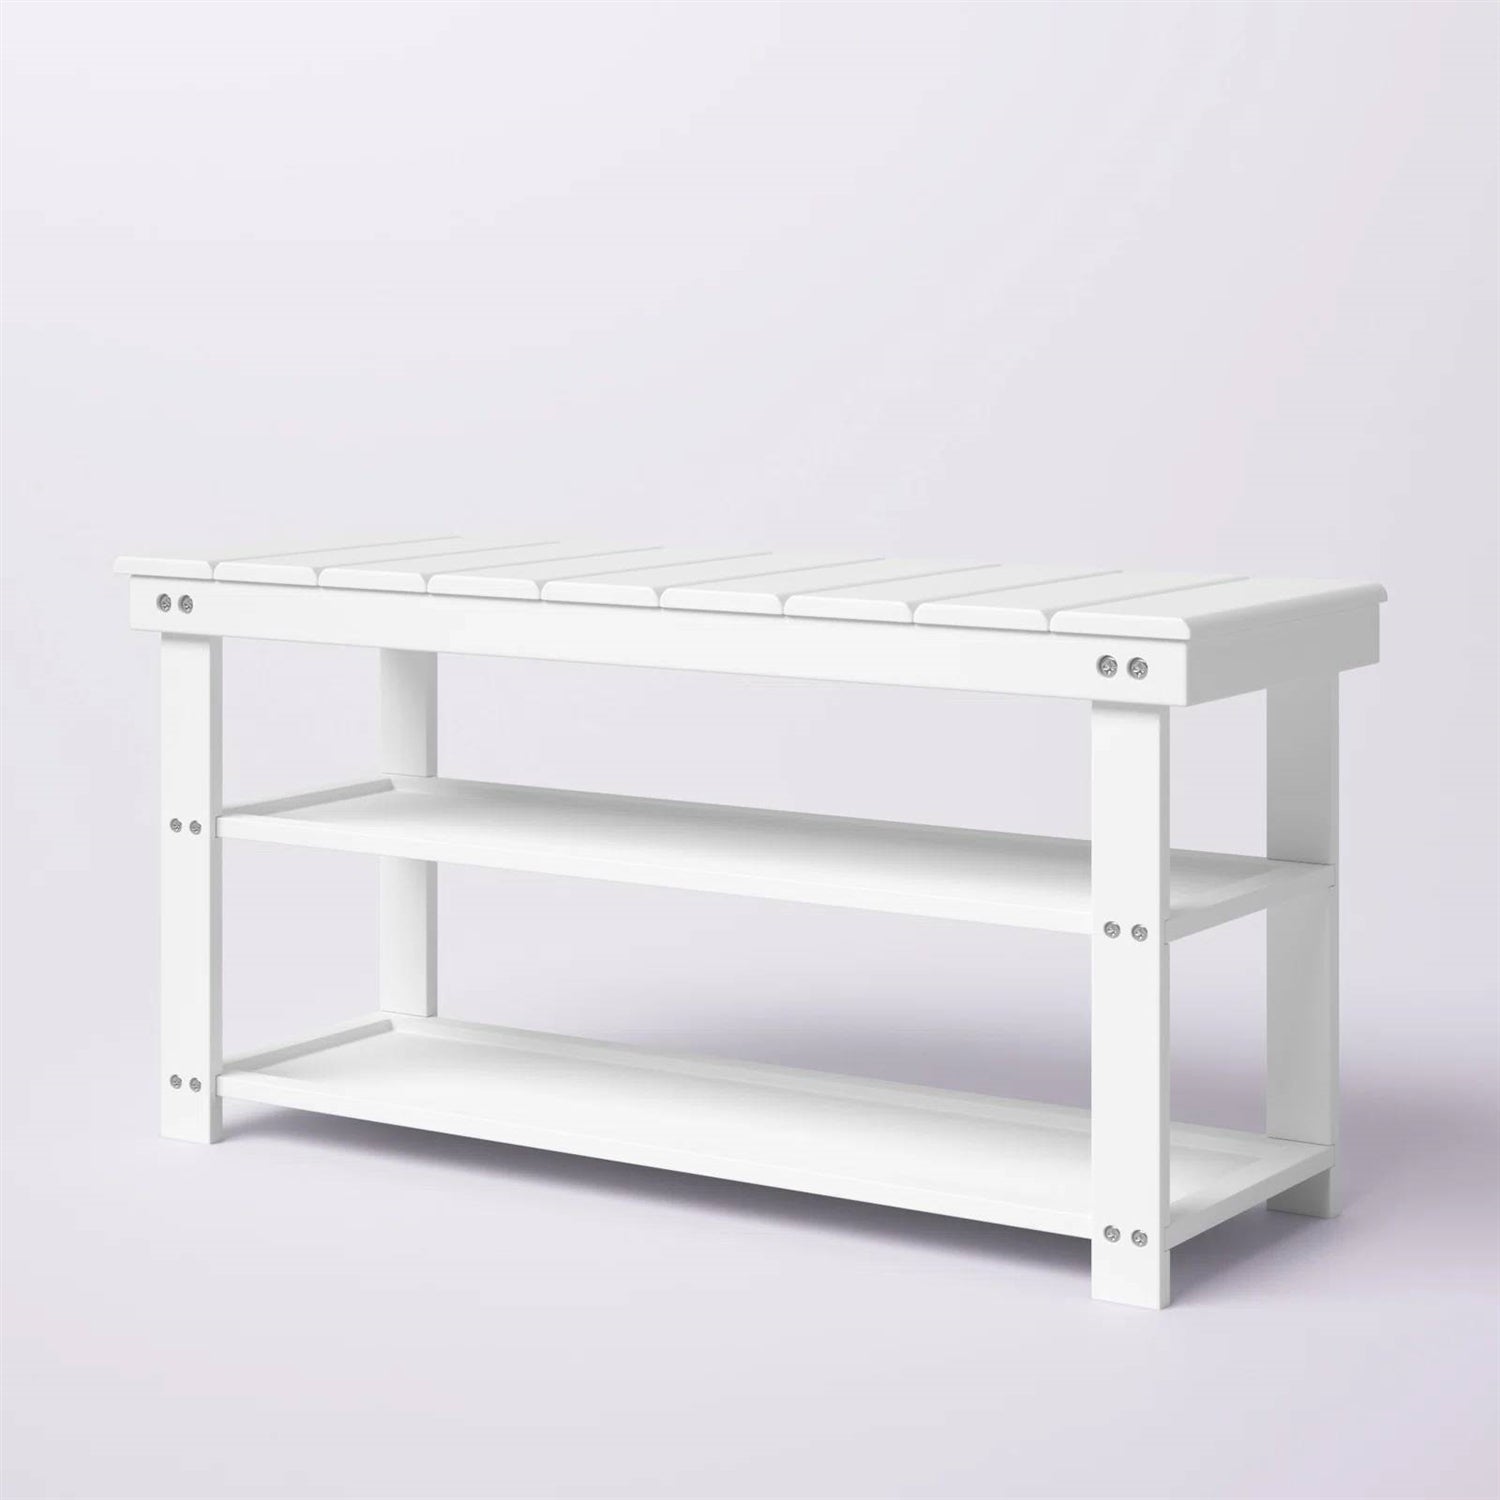 Accents > Shoe Racks - White Slatted Wood 2-Shelf Shoe Rack Storage Bench For Entryway Or Closet